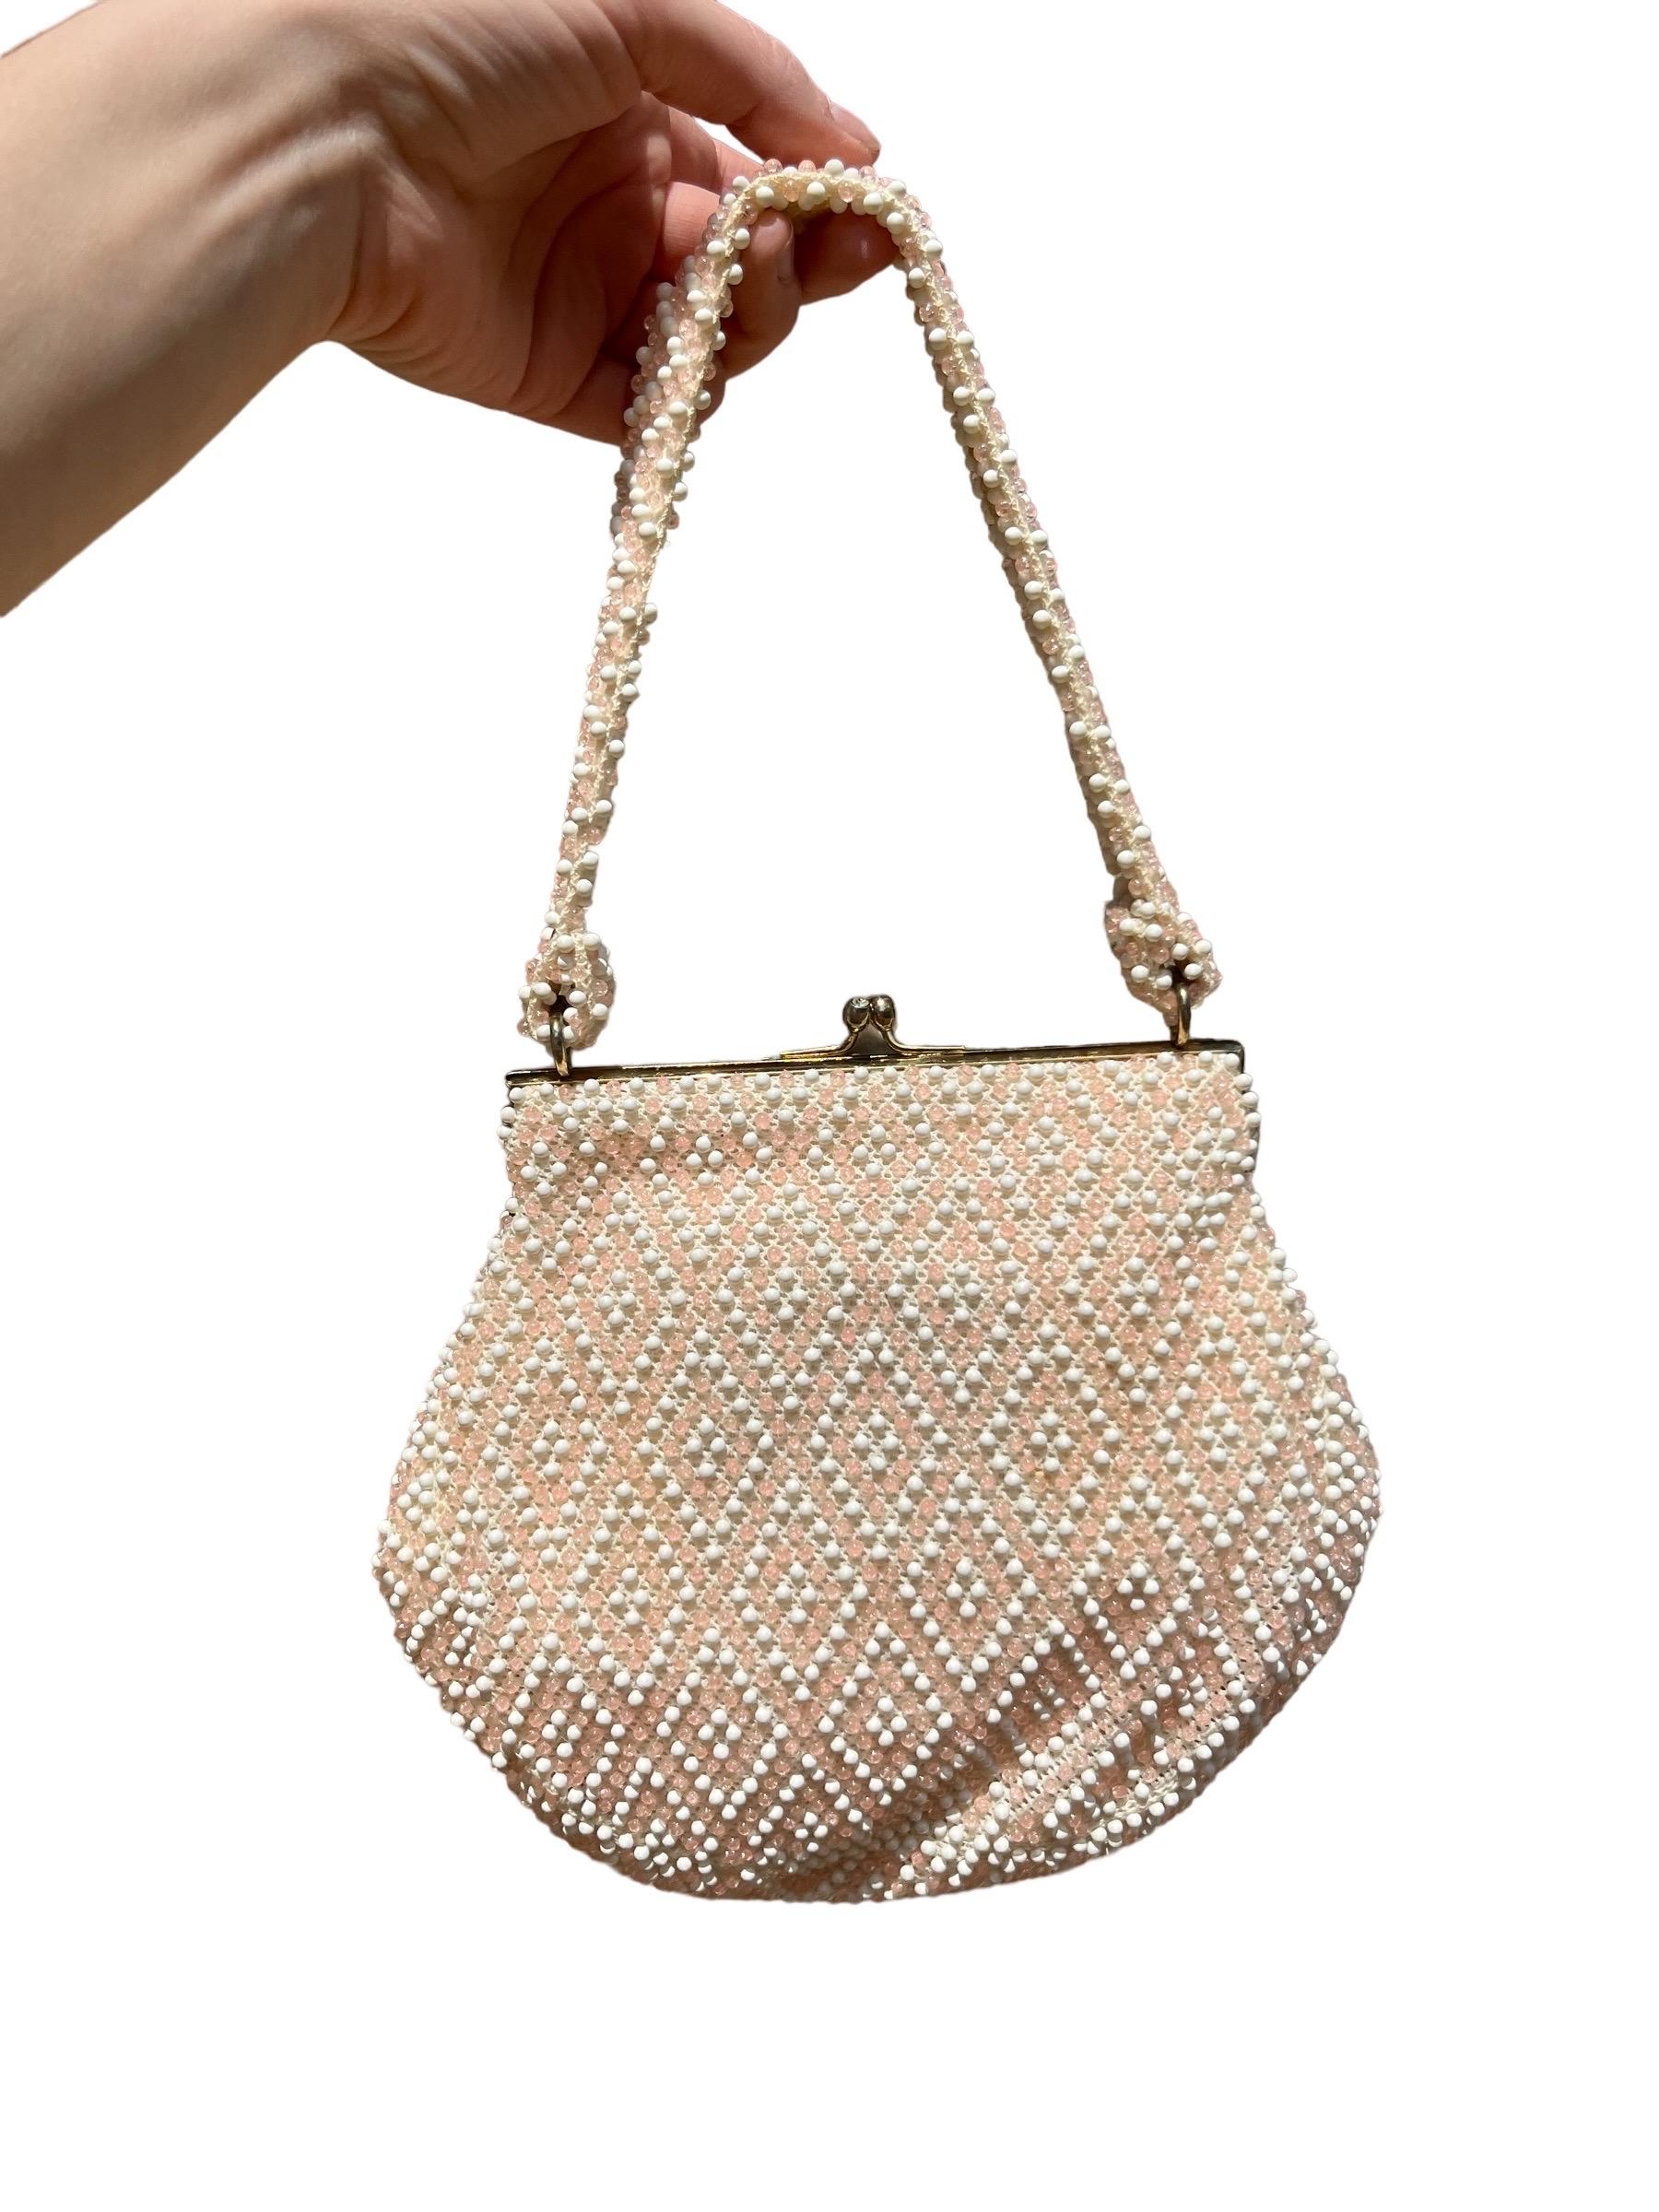 1950’s Light Pink Corde-Bead Bubble Handbag by Lumured

Soft pink purse with white bubble beads in diamond pattern. Sweet rhinestone detail on metal clasp. Comes with original mirror inside pocket! 

Excellent condition!

Measurements:
Width